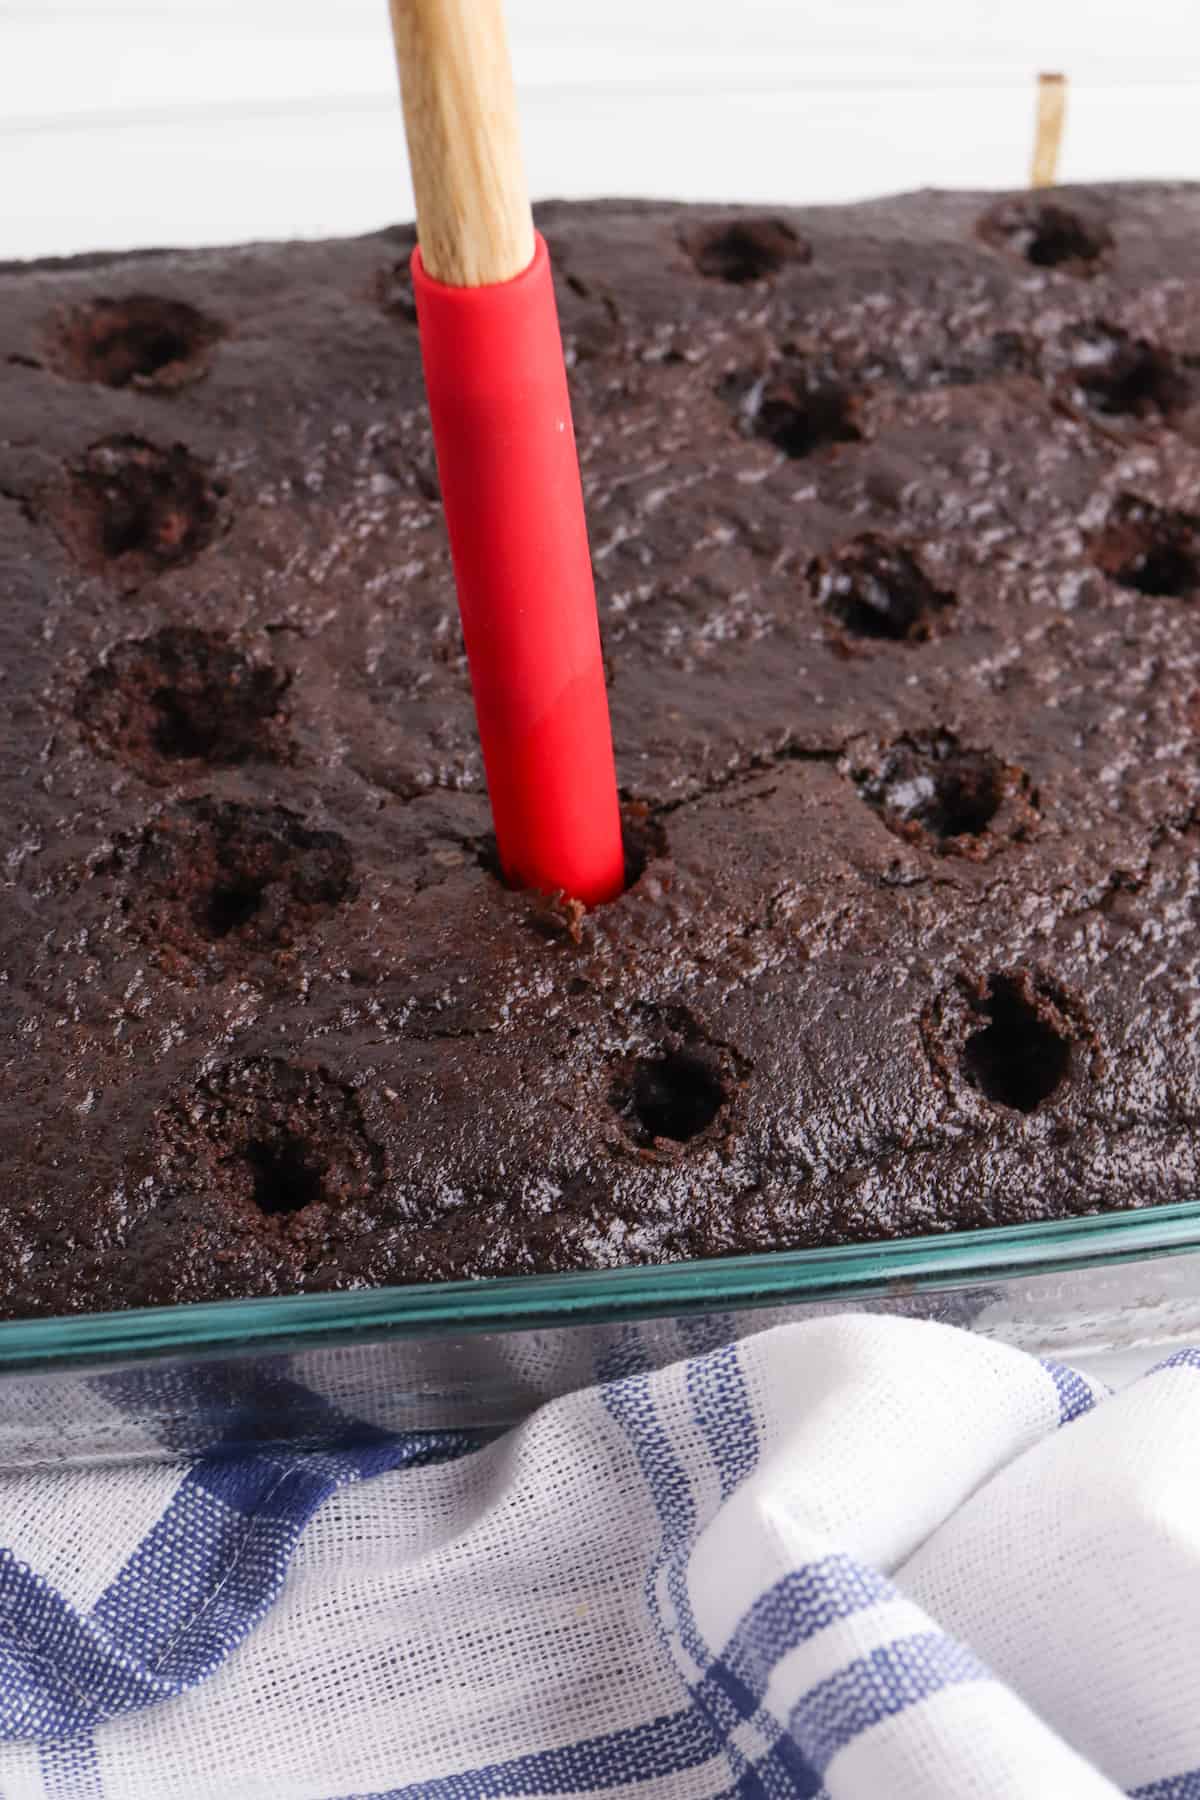 Chocolate cake with holes for drizzling caramel.